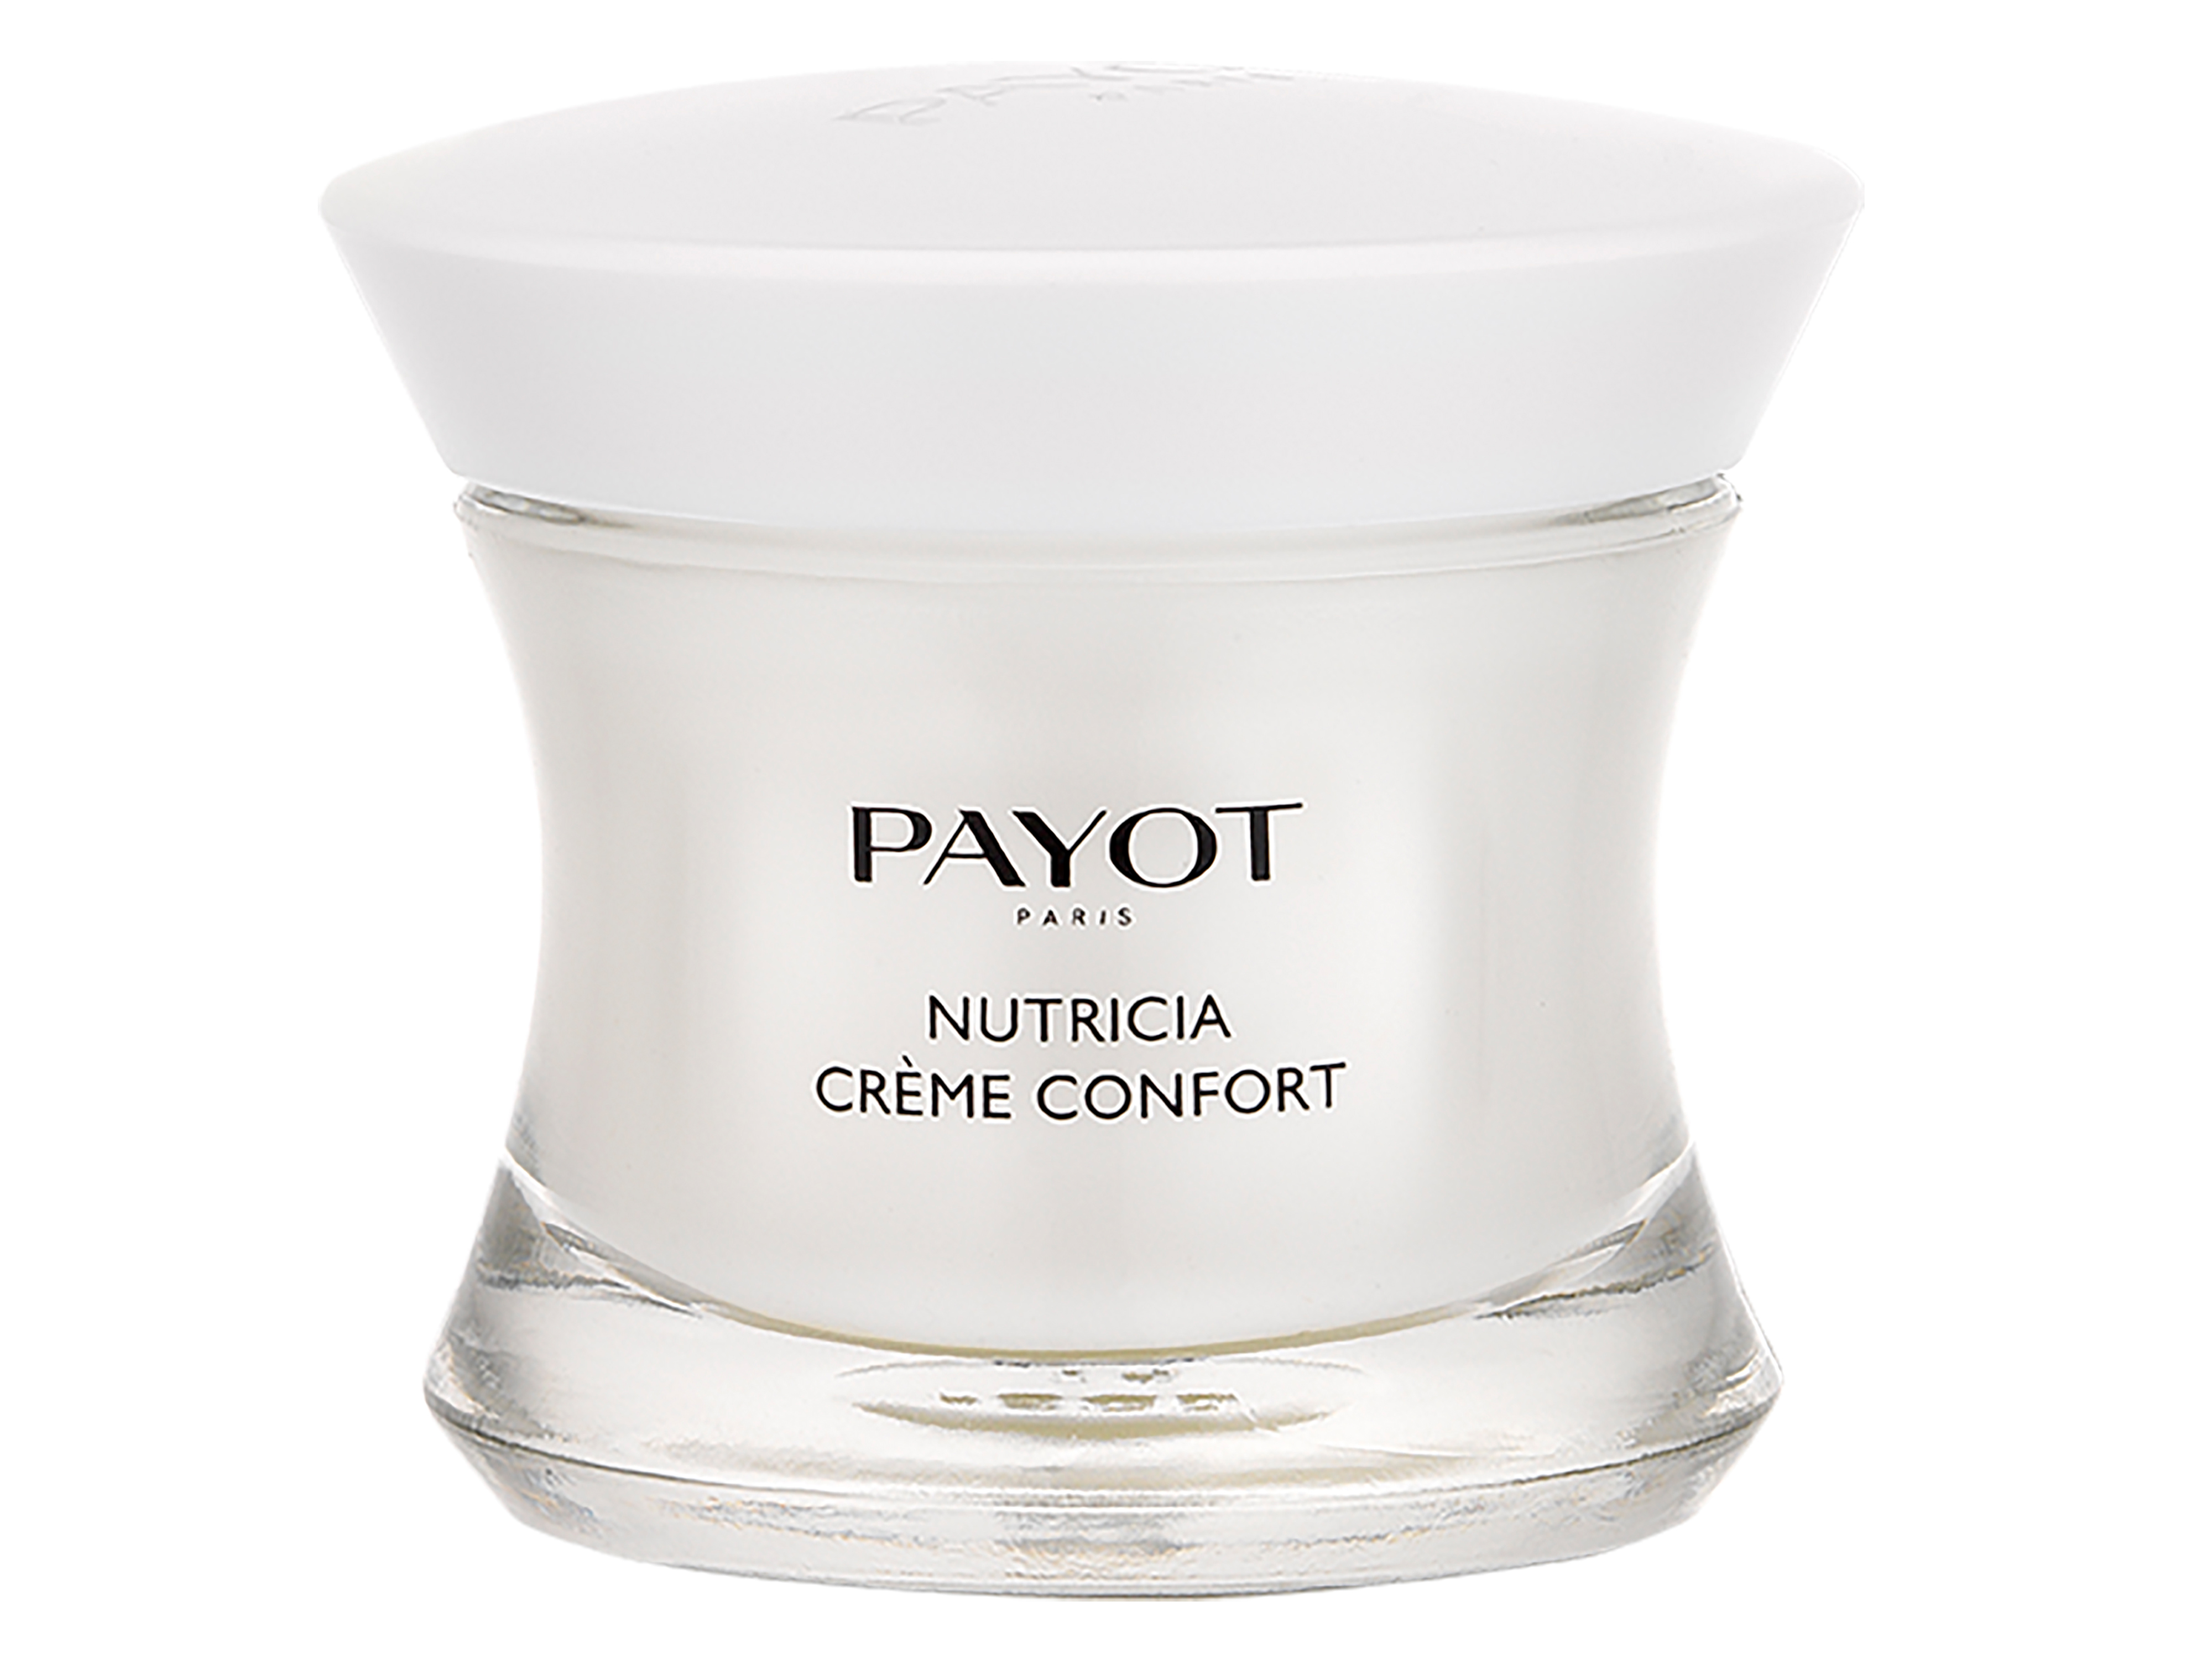 Payot Nutricia Creme Confort, 50 ml